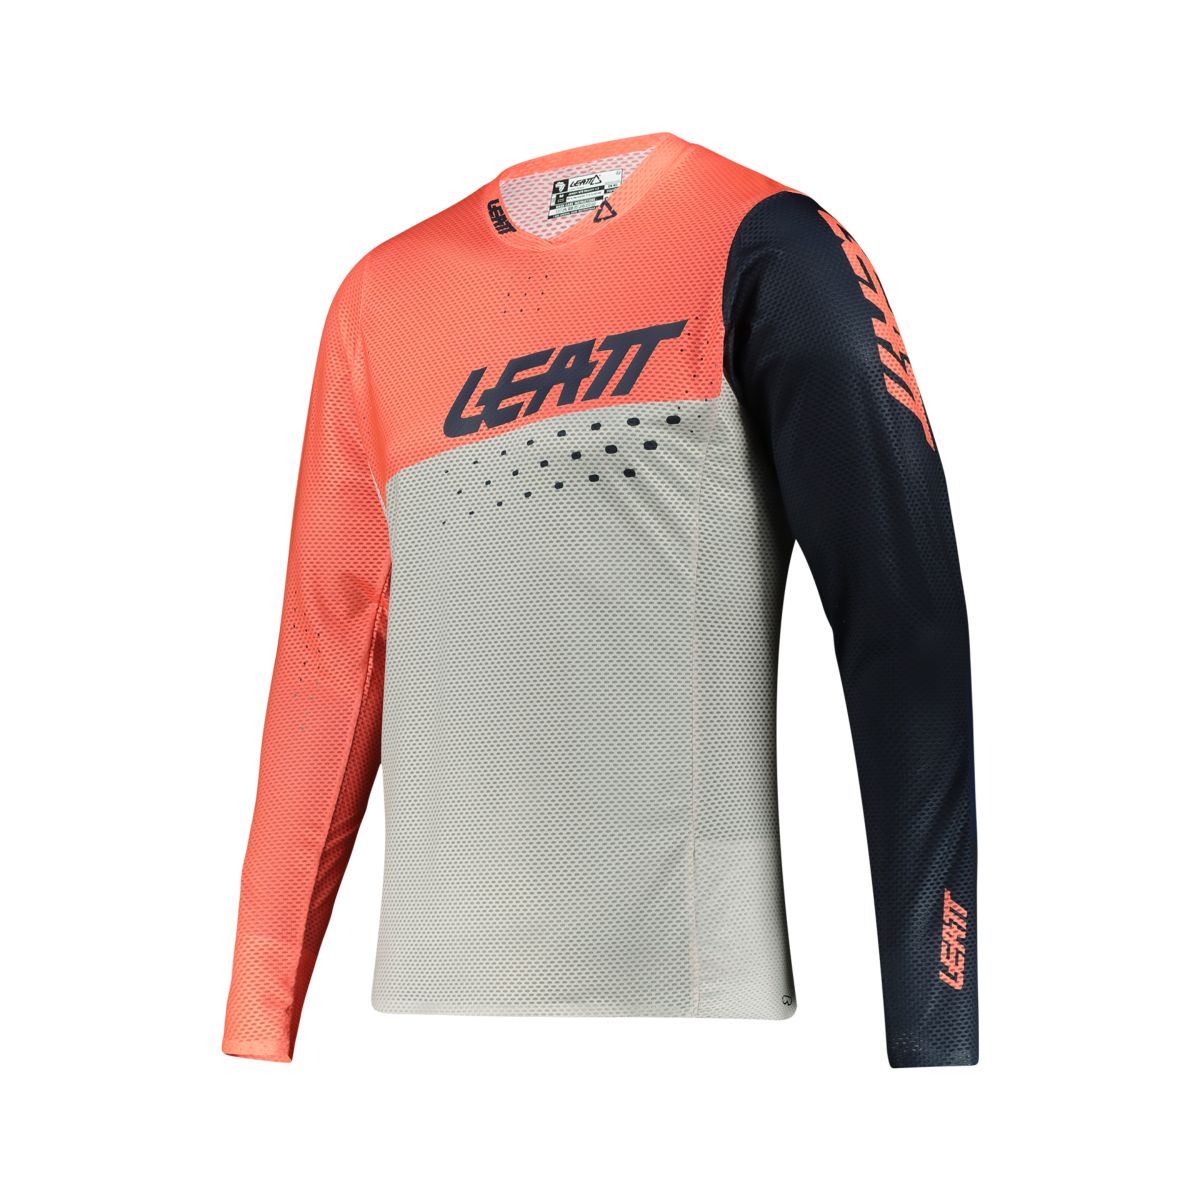 Leatt Apparel Jersey Mtb 4.0 Gravity Coral S in Coral